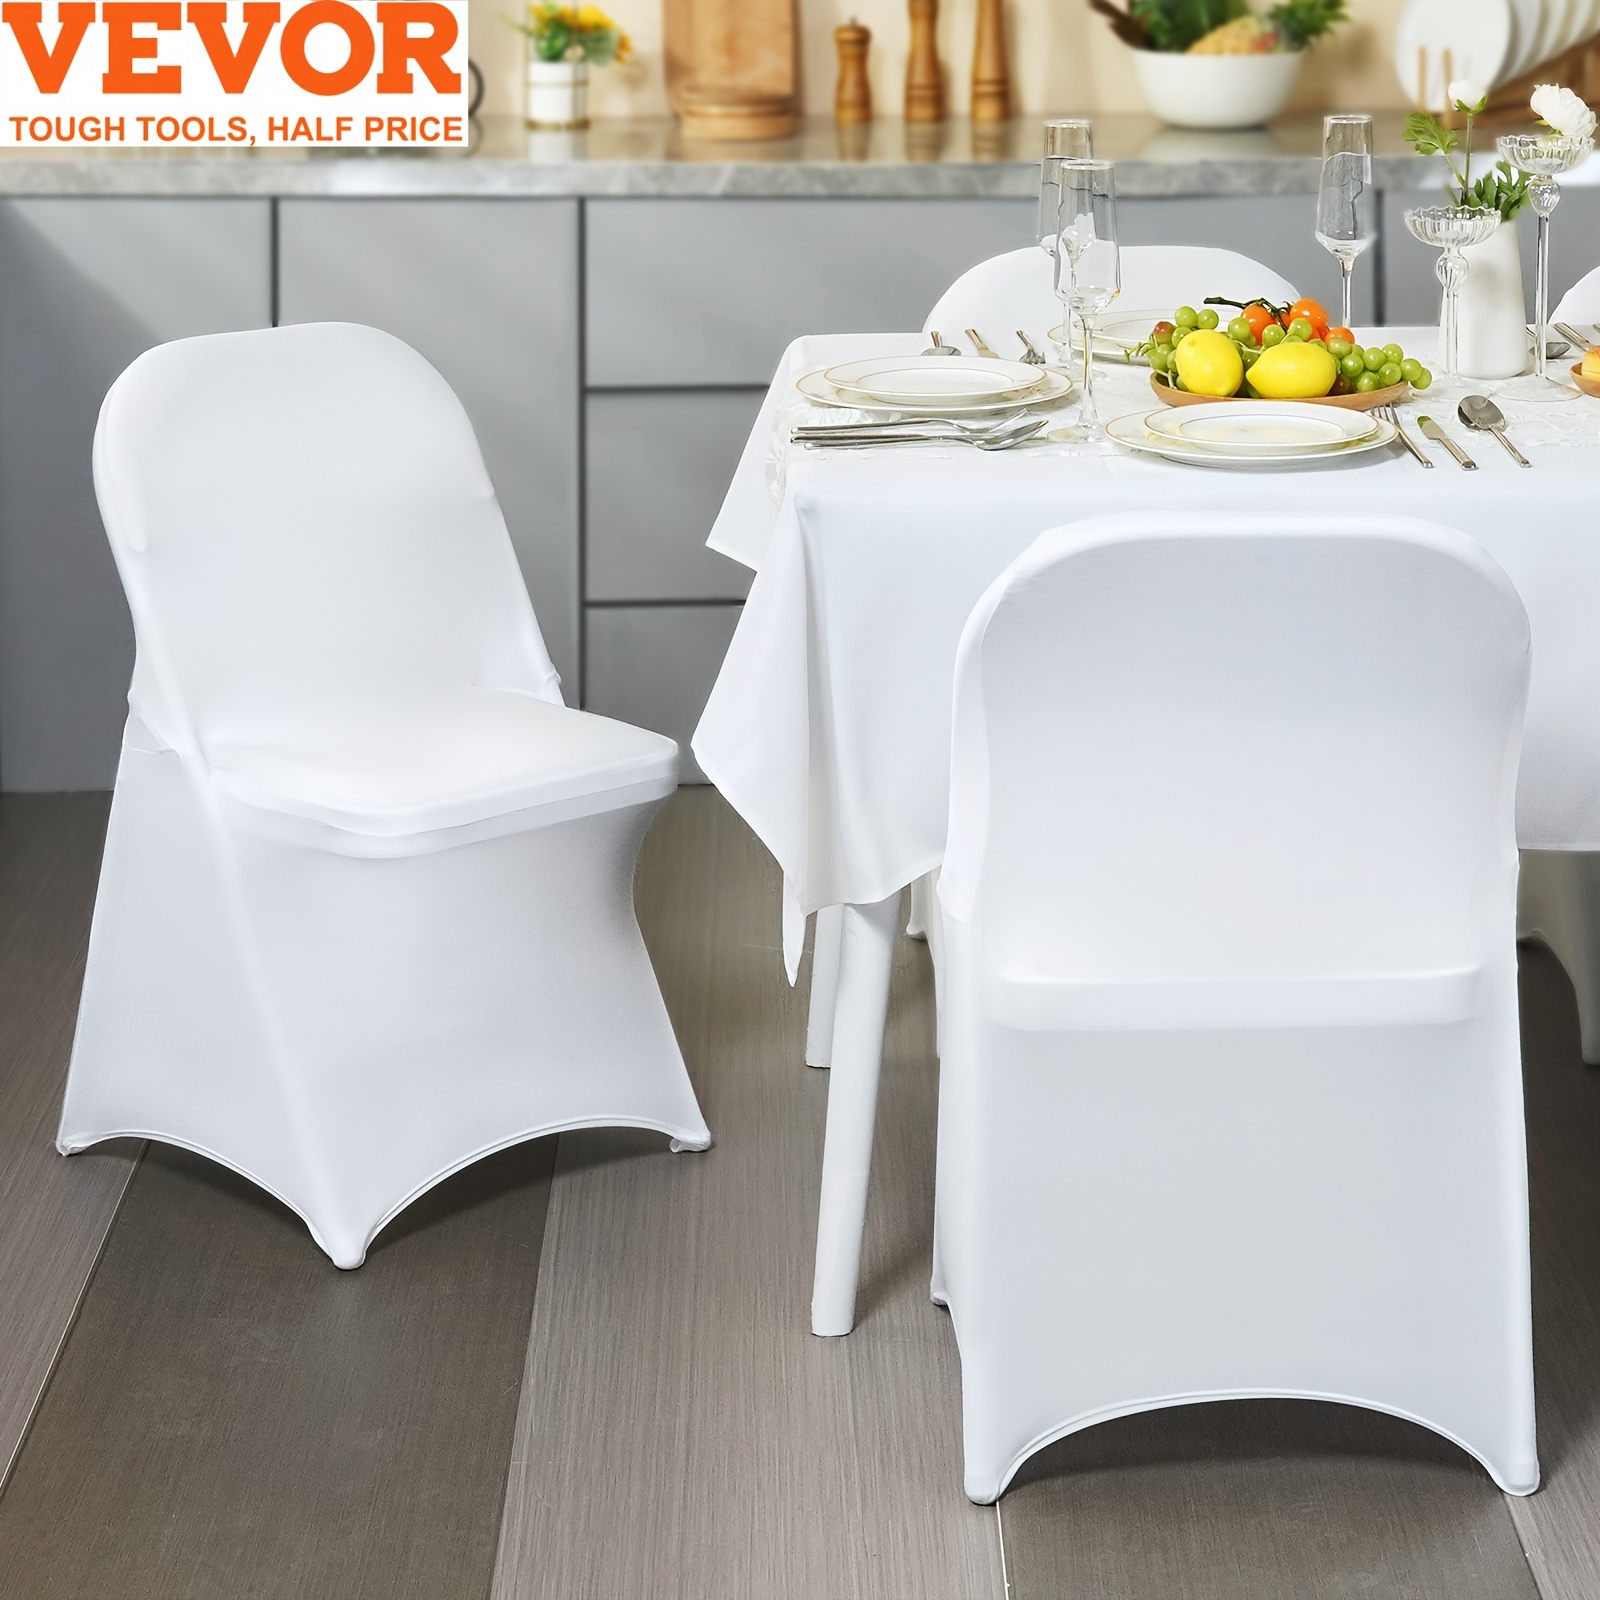 

Vevor White Stretch Spandex Chair Covers - 30 Pcs, Folding Kitchen Chairs Cover, Universal Washable Slipcovers Protector, Removable Chair Seat Covers, For Wedding Party Dining Room Banquet Event